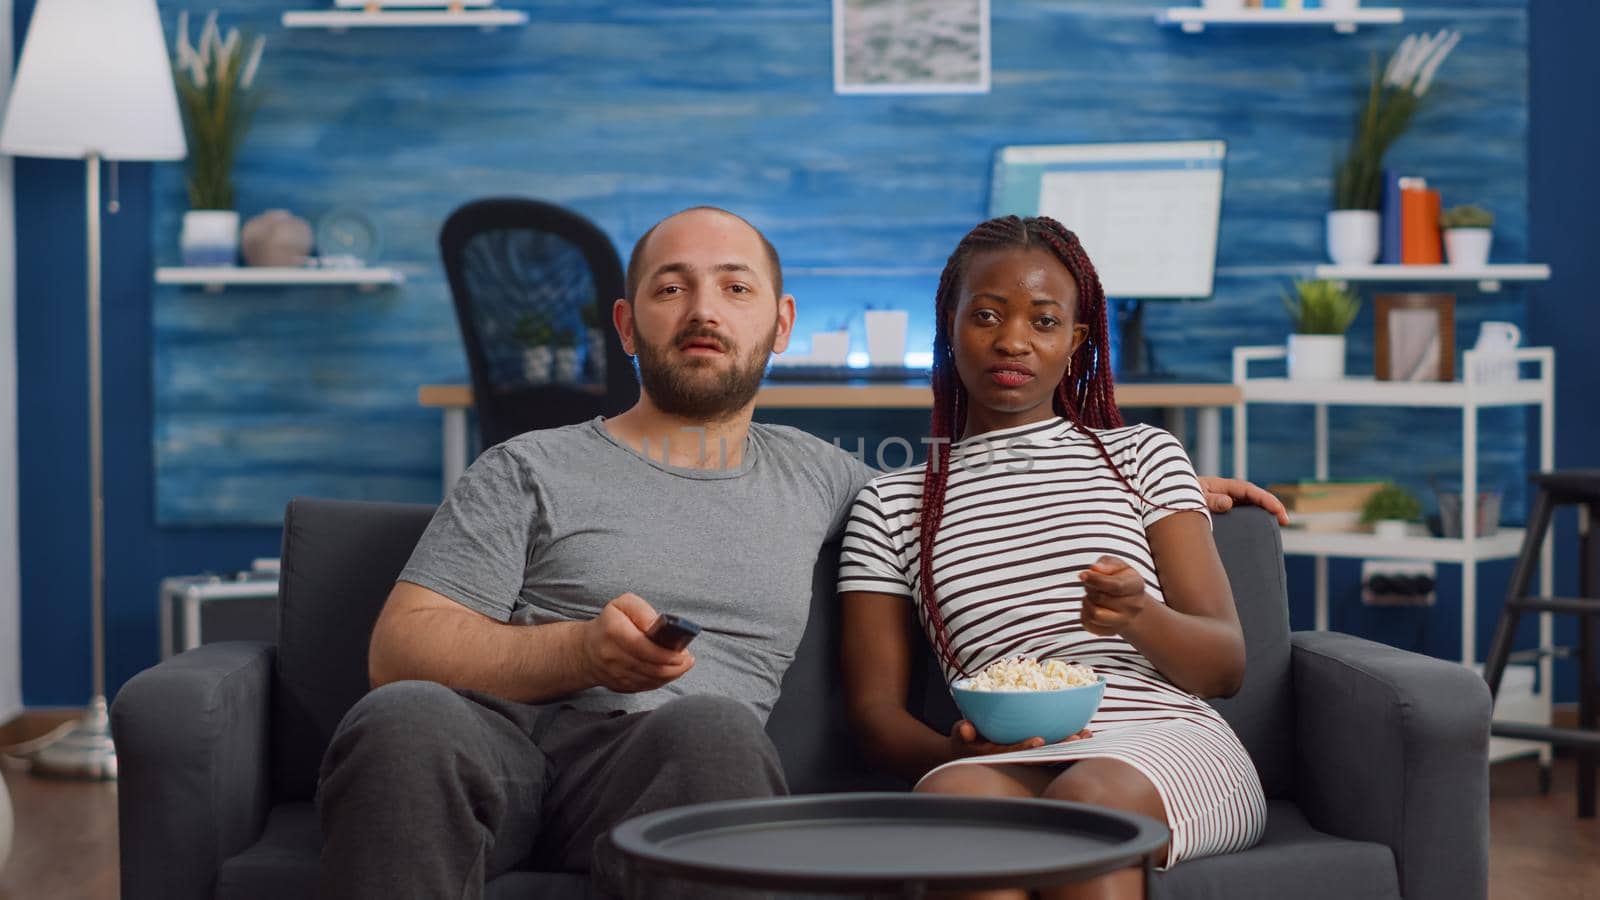 Young interracial couple watching television in living room. African american woman eating popcorn while caucasian man switching channels with TV remote control. Mixed race relationship